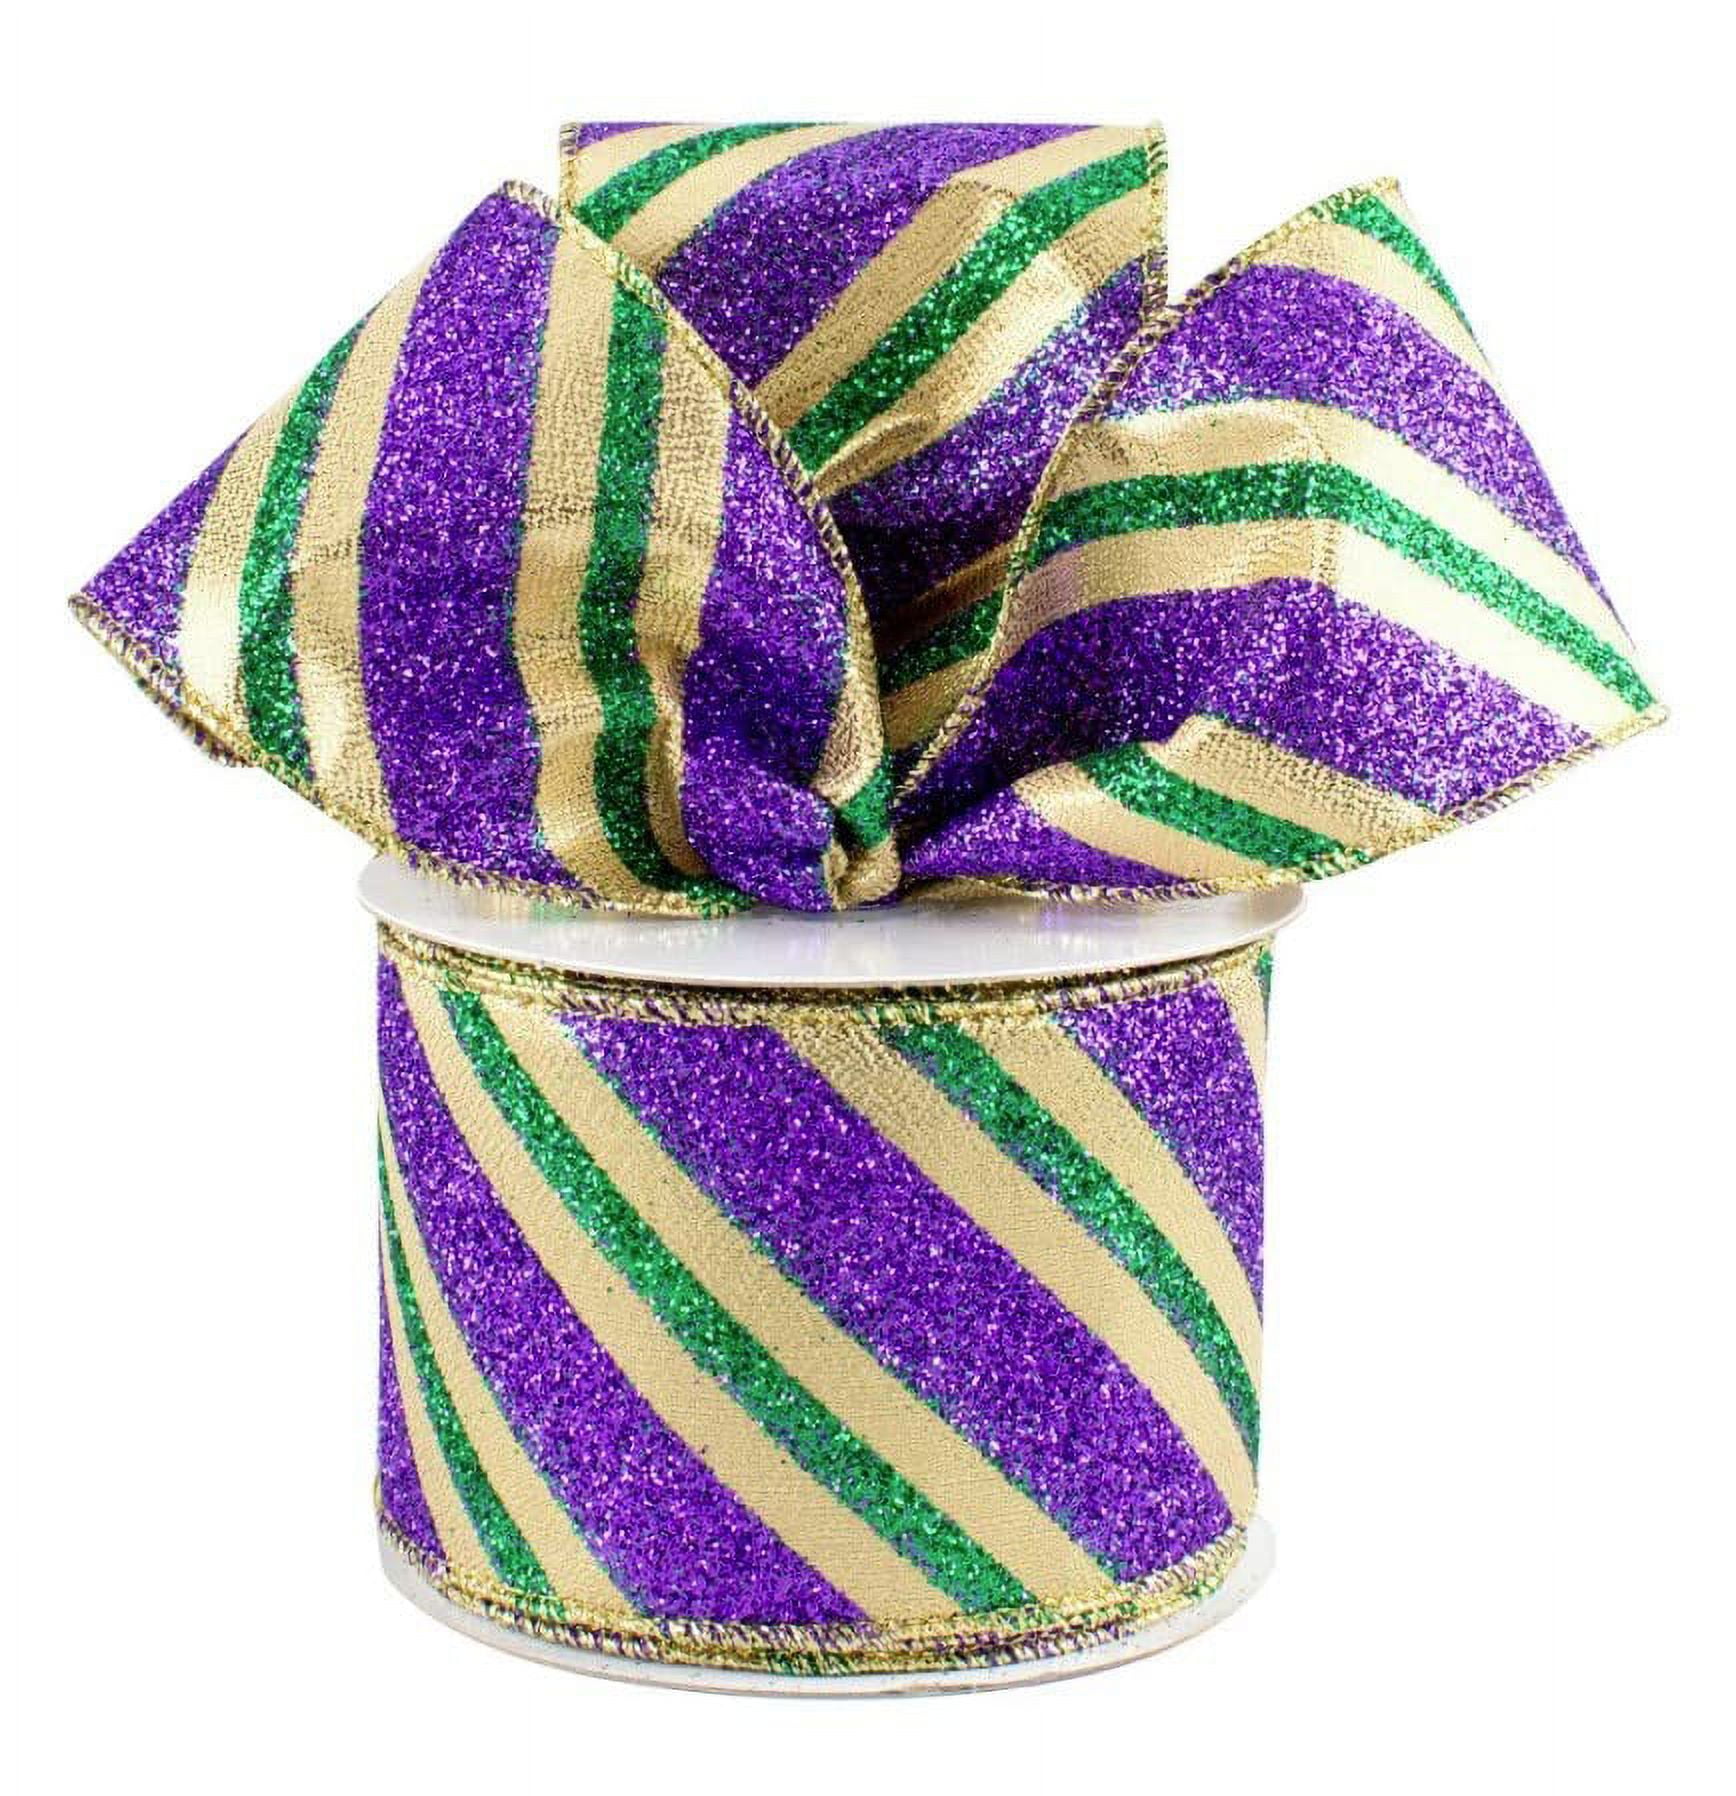 Metallic Stripe Mardi Gras Bow - available in 2 sizes - Package Perfect Bows